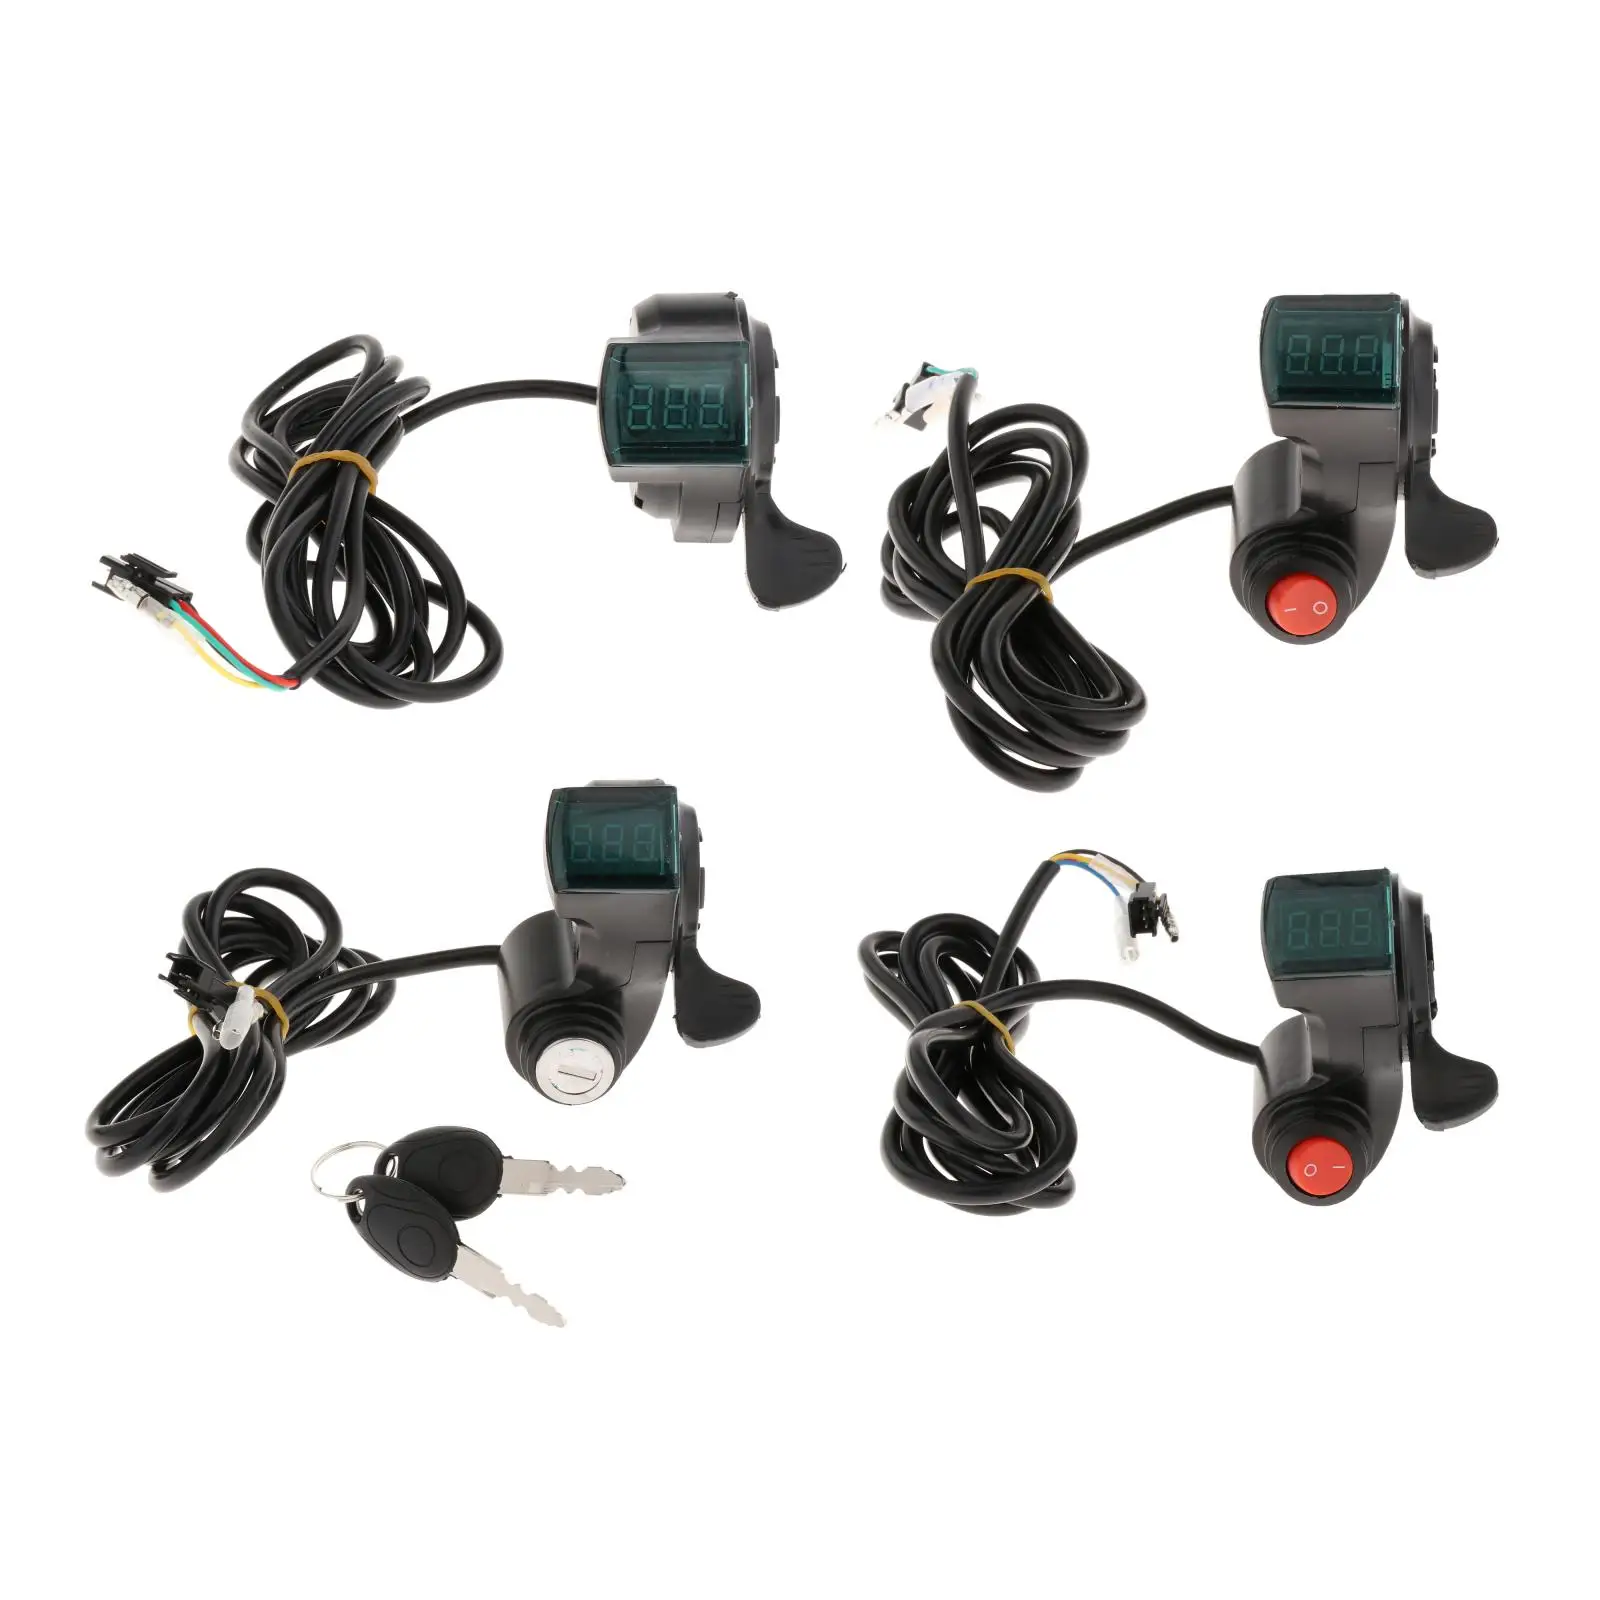 1pc E-Bike Battery Voltage Display Switch Power Indicator Finger Accelerator for Twist Throttle Accs